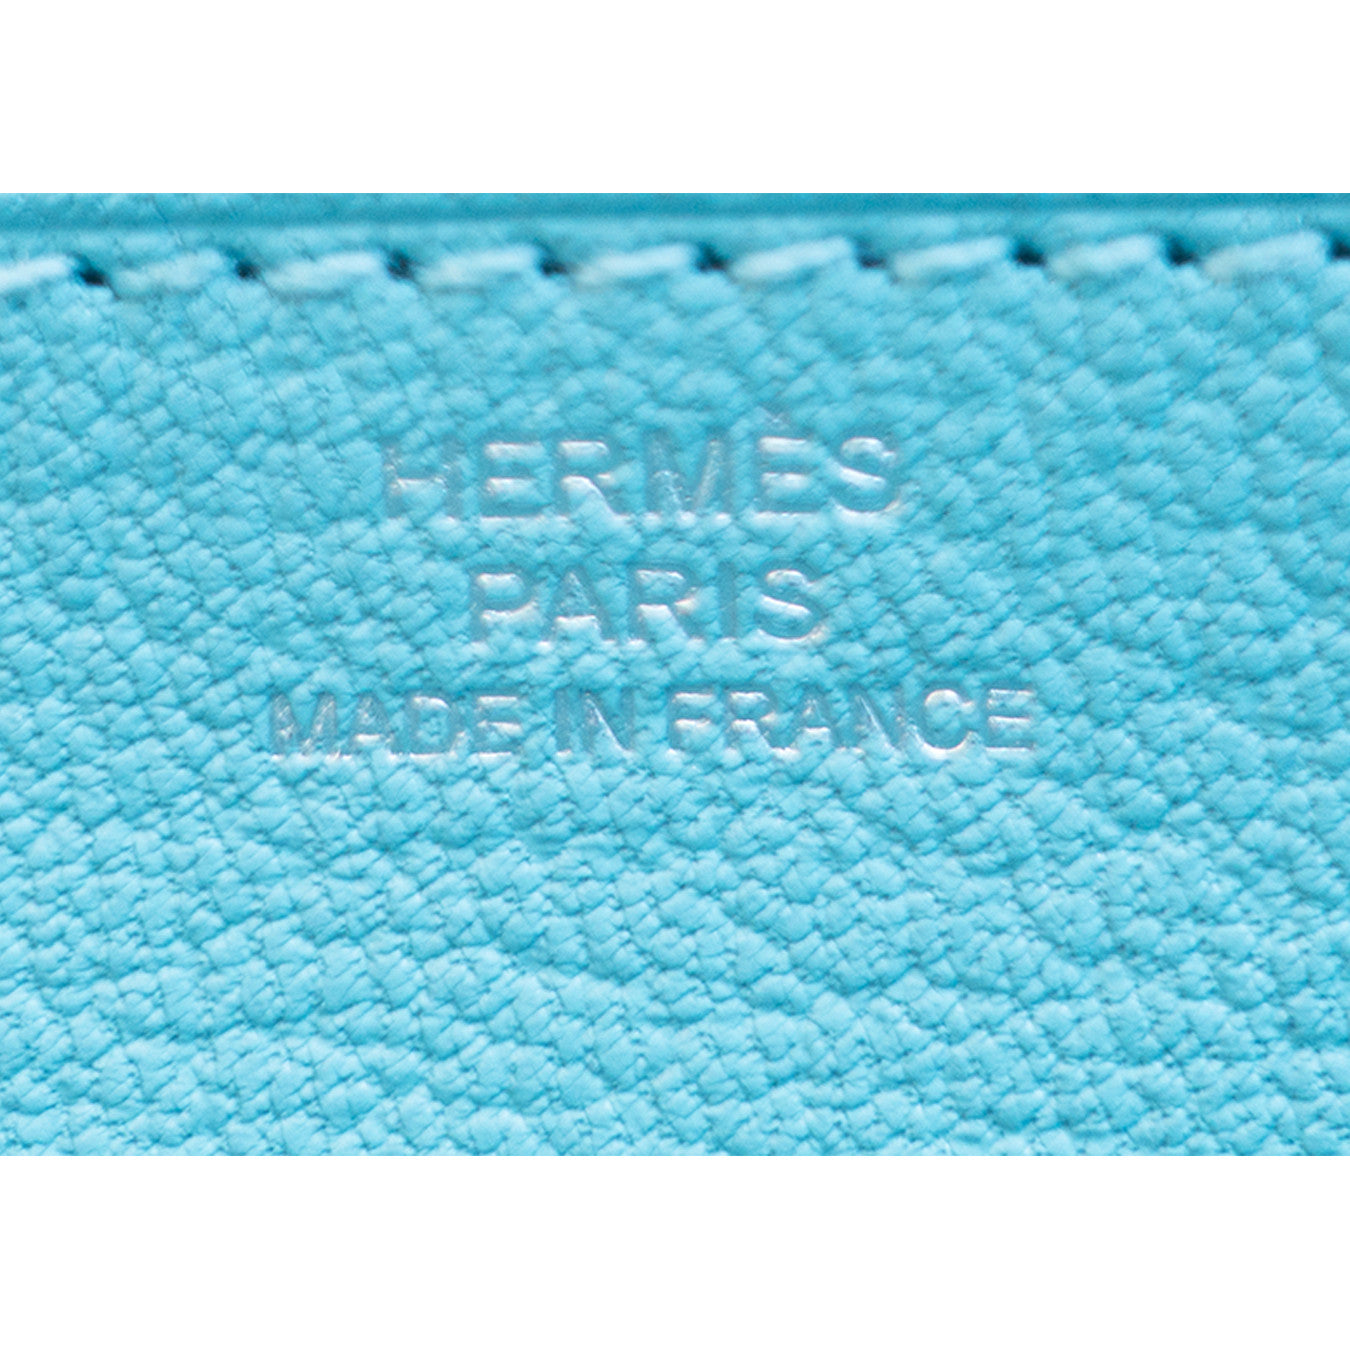 Authentic NEW Hermes Kelly Classic Long Wallet Ghillies Blue Atoll